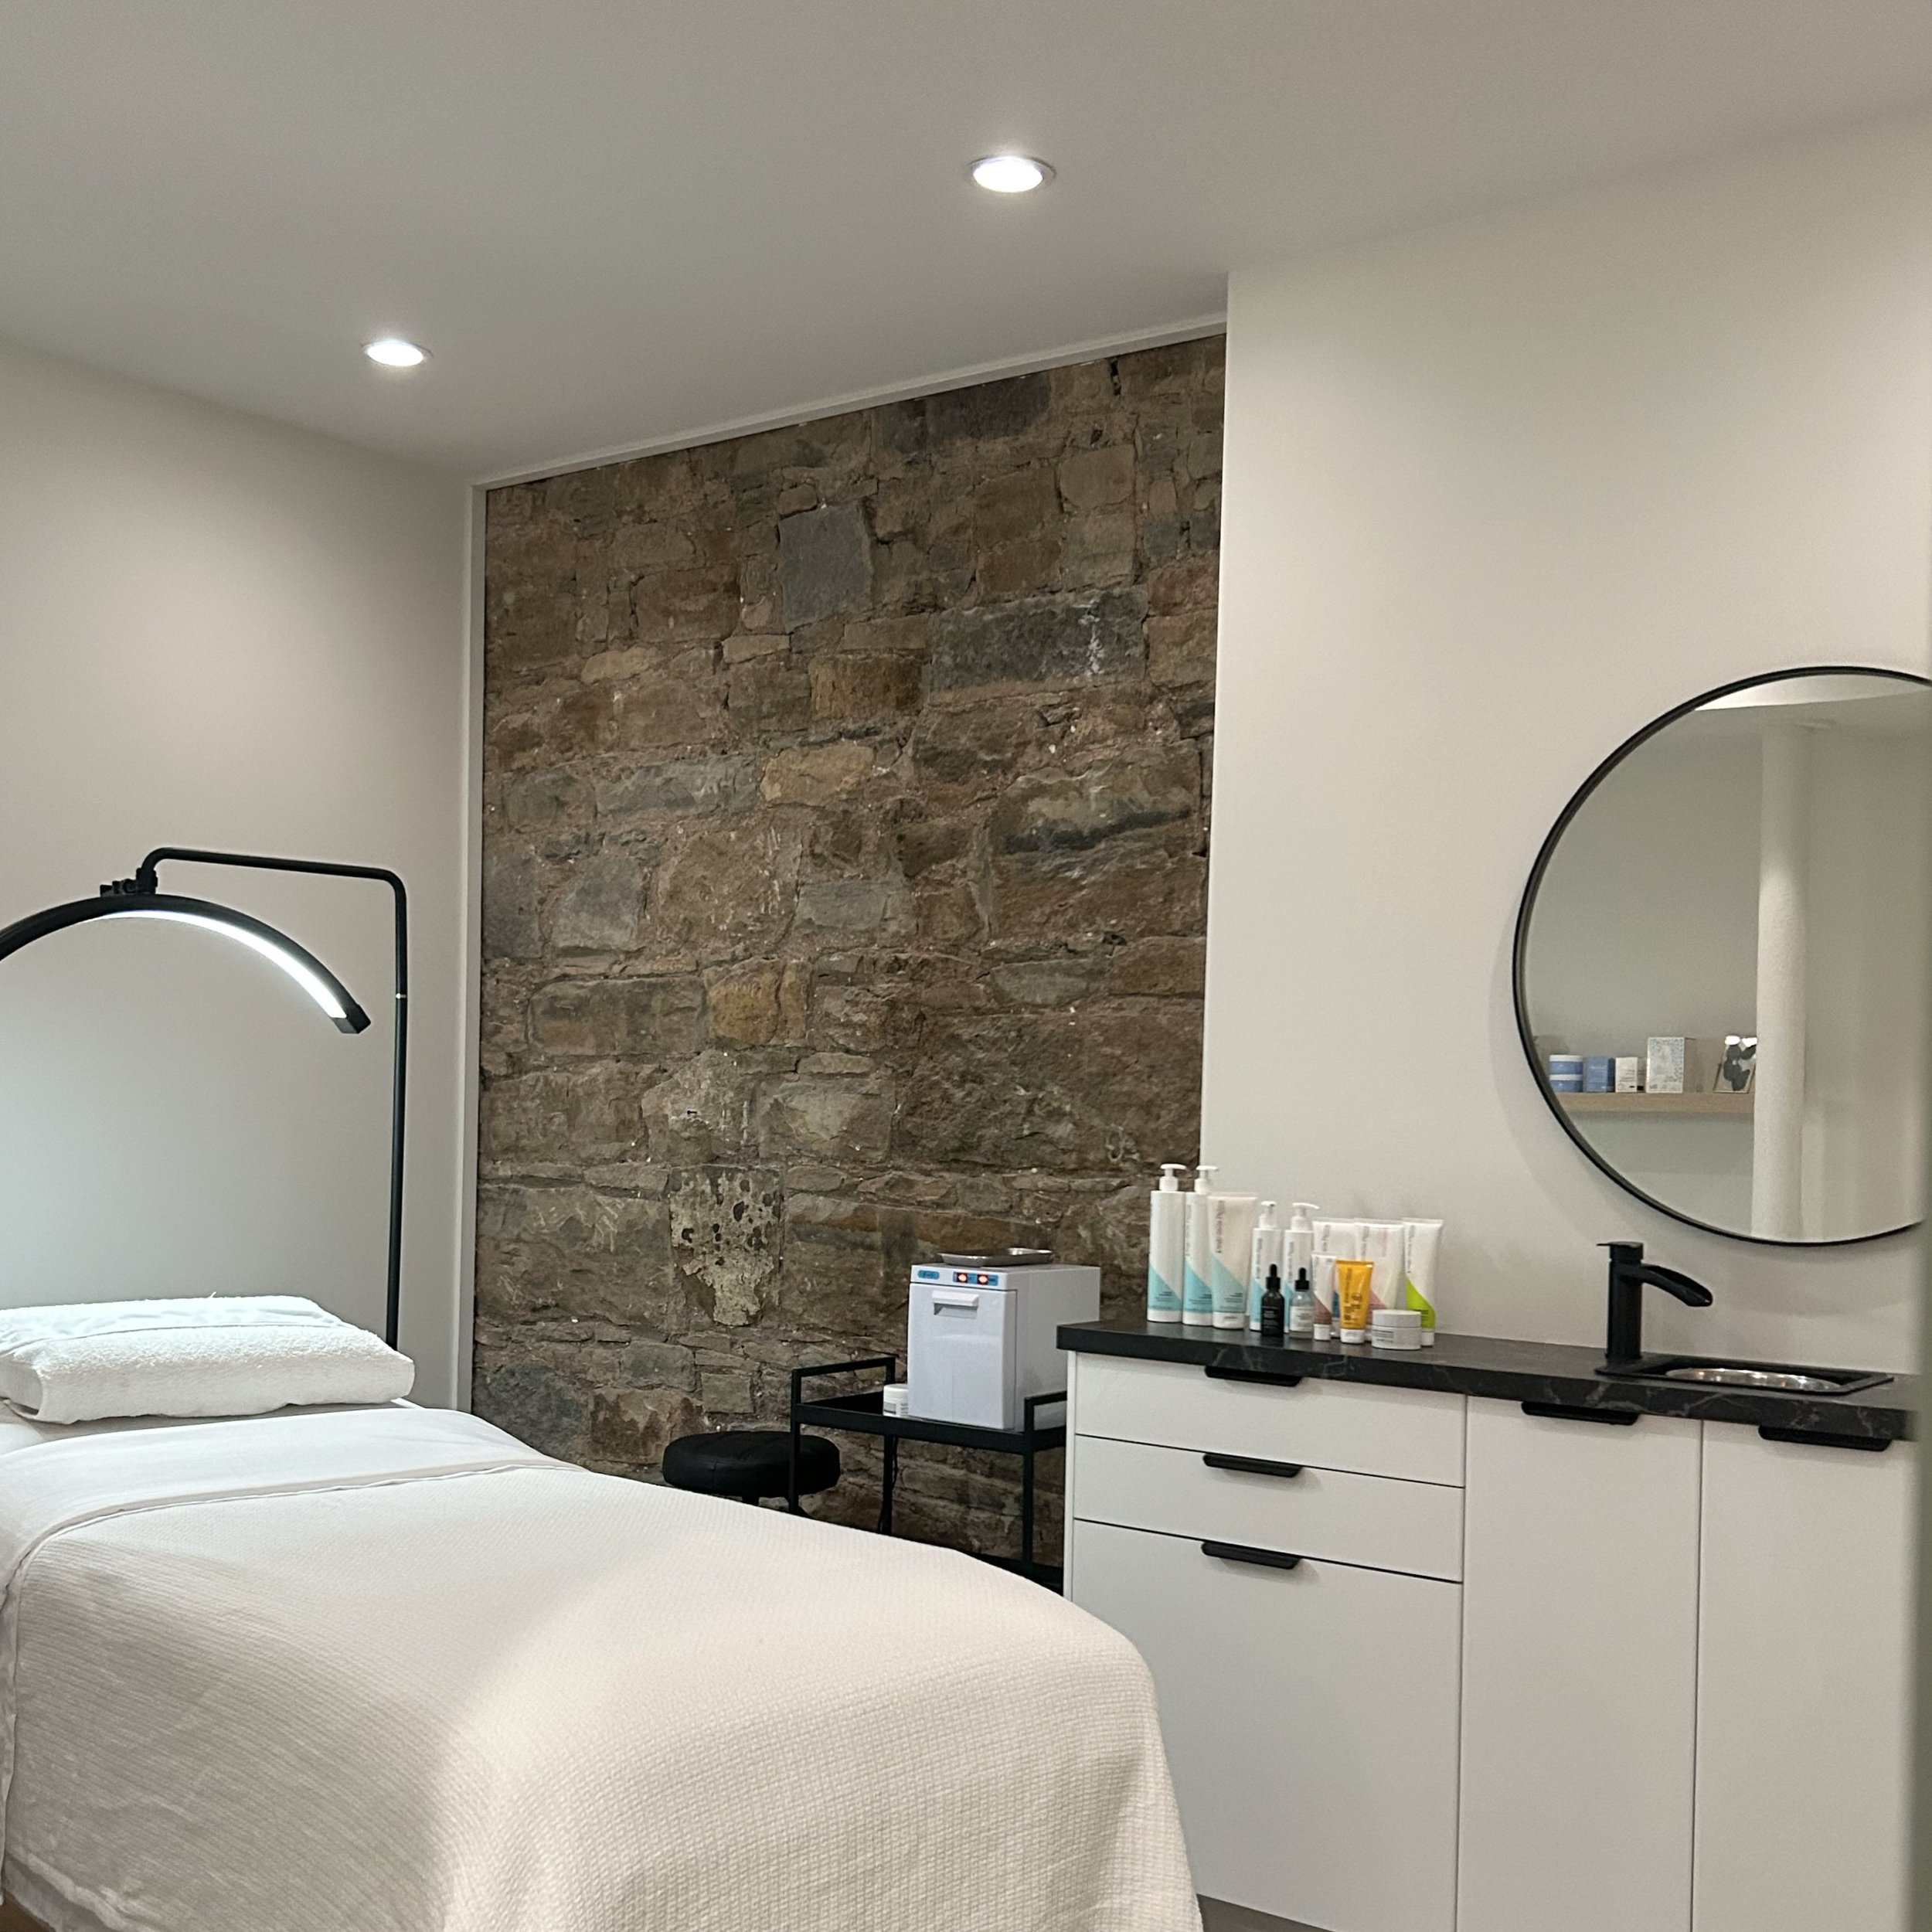 Views from the treatment room 🫶🏻

This is where all your troubles melt away. Our facials are designed not only to treat your skin concerns but also to provide the ultimate relaxation experience. Indulge in a rejuvenating session that leaves you fee